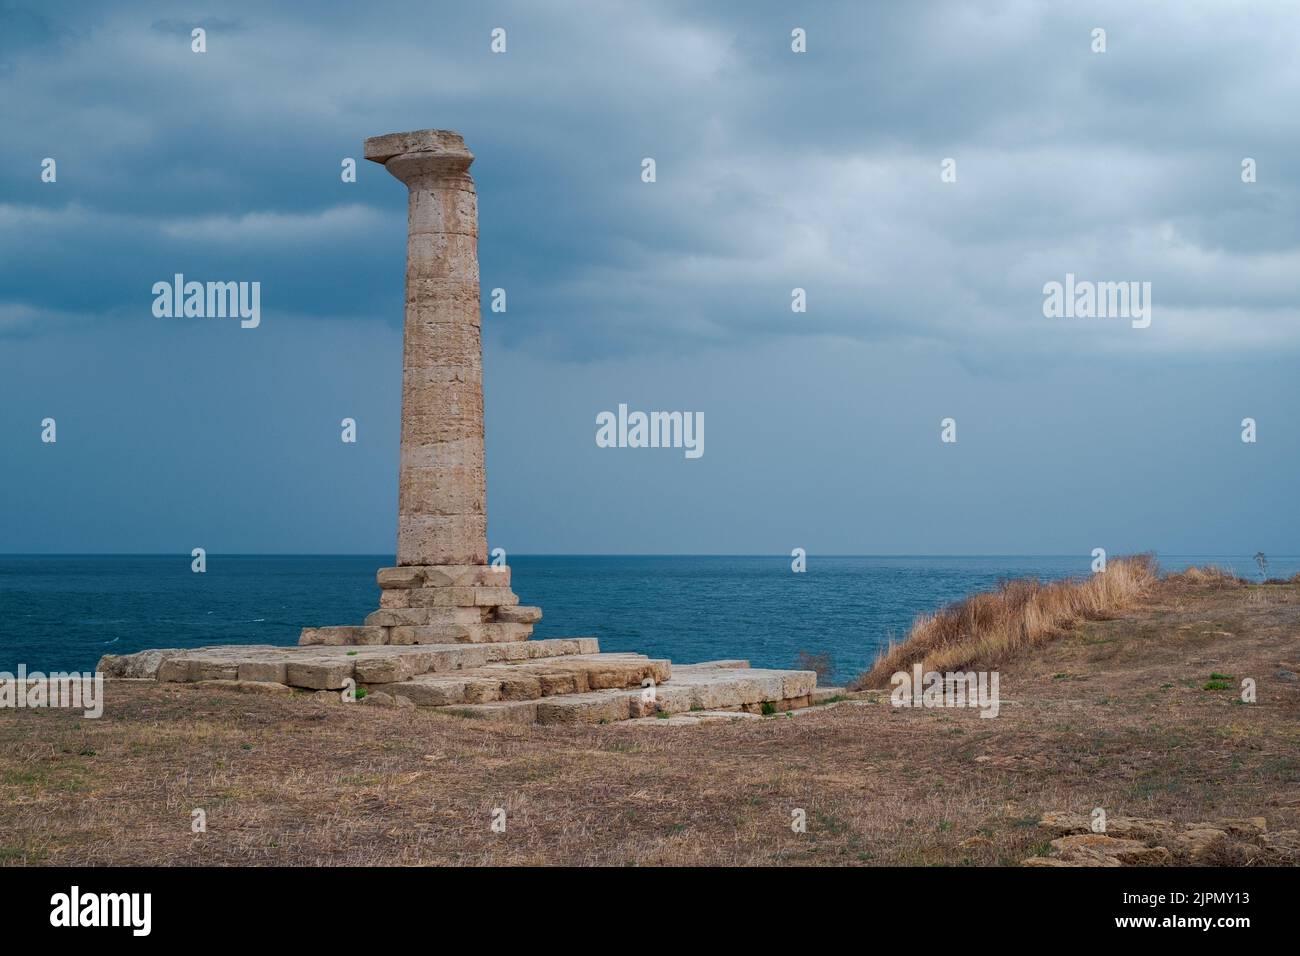 The ancient Doric column of Capo Colonna in a cloudy day. Crotone province, Calabria, Italy. Stock Photo